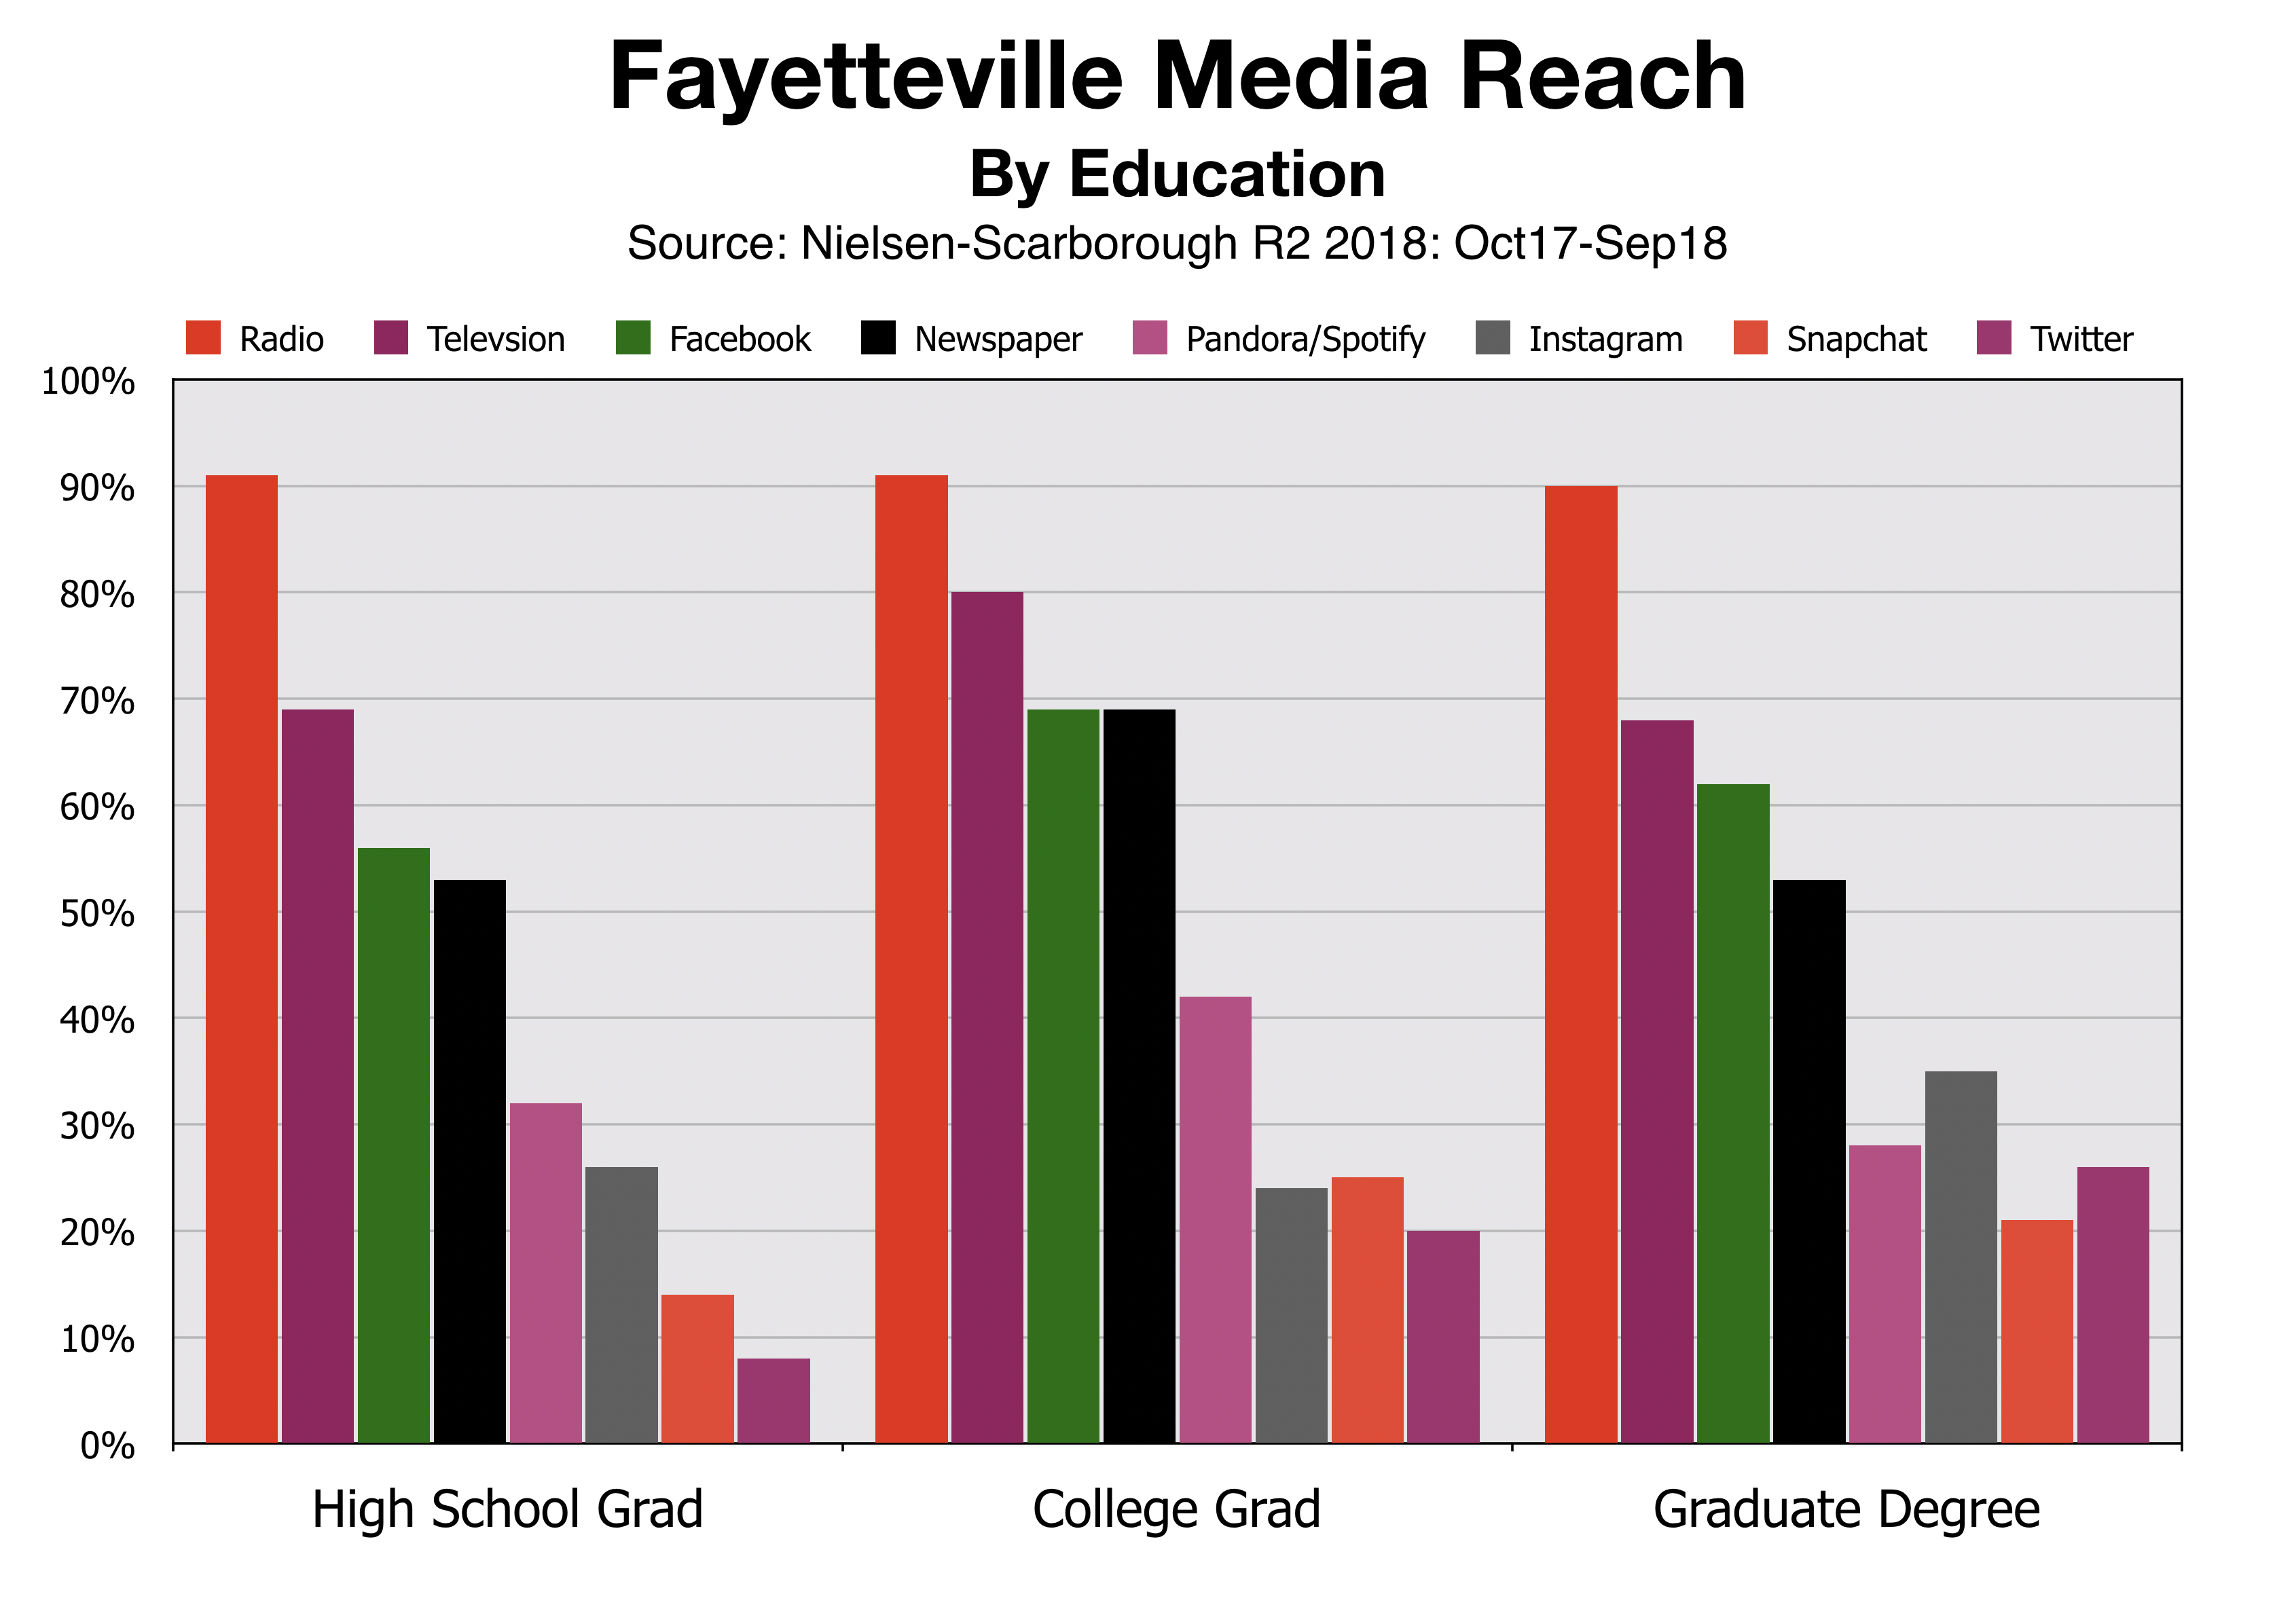 Advertise In Fayetteville By Education Levl